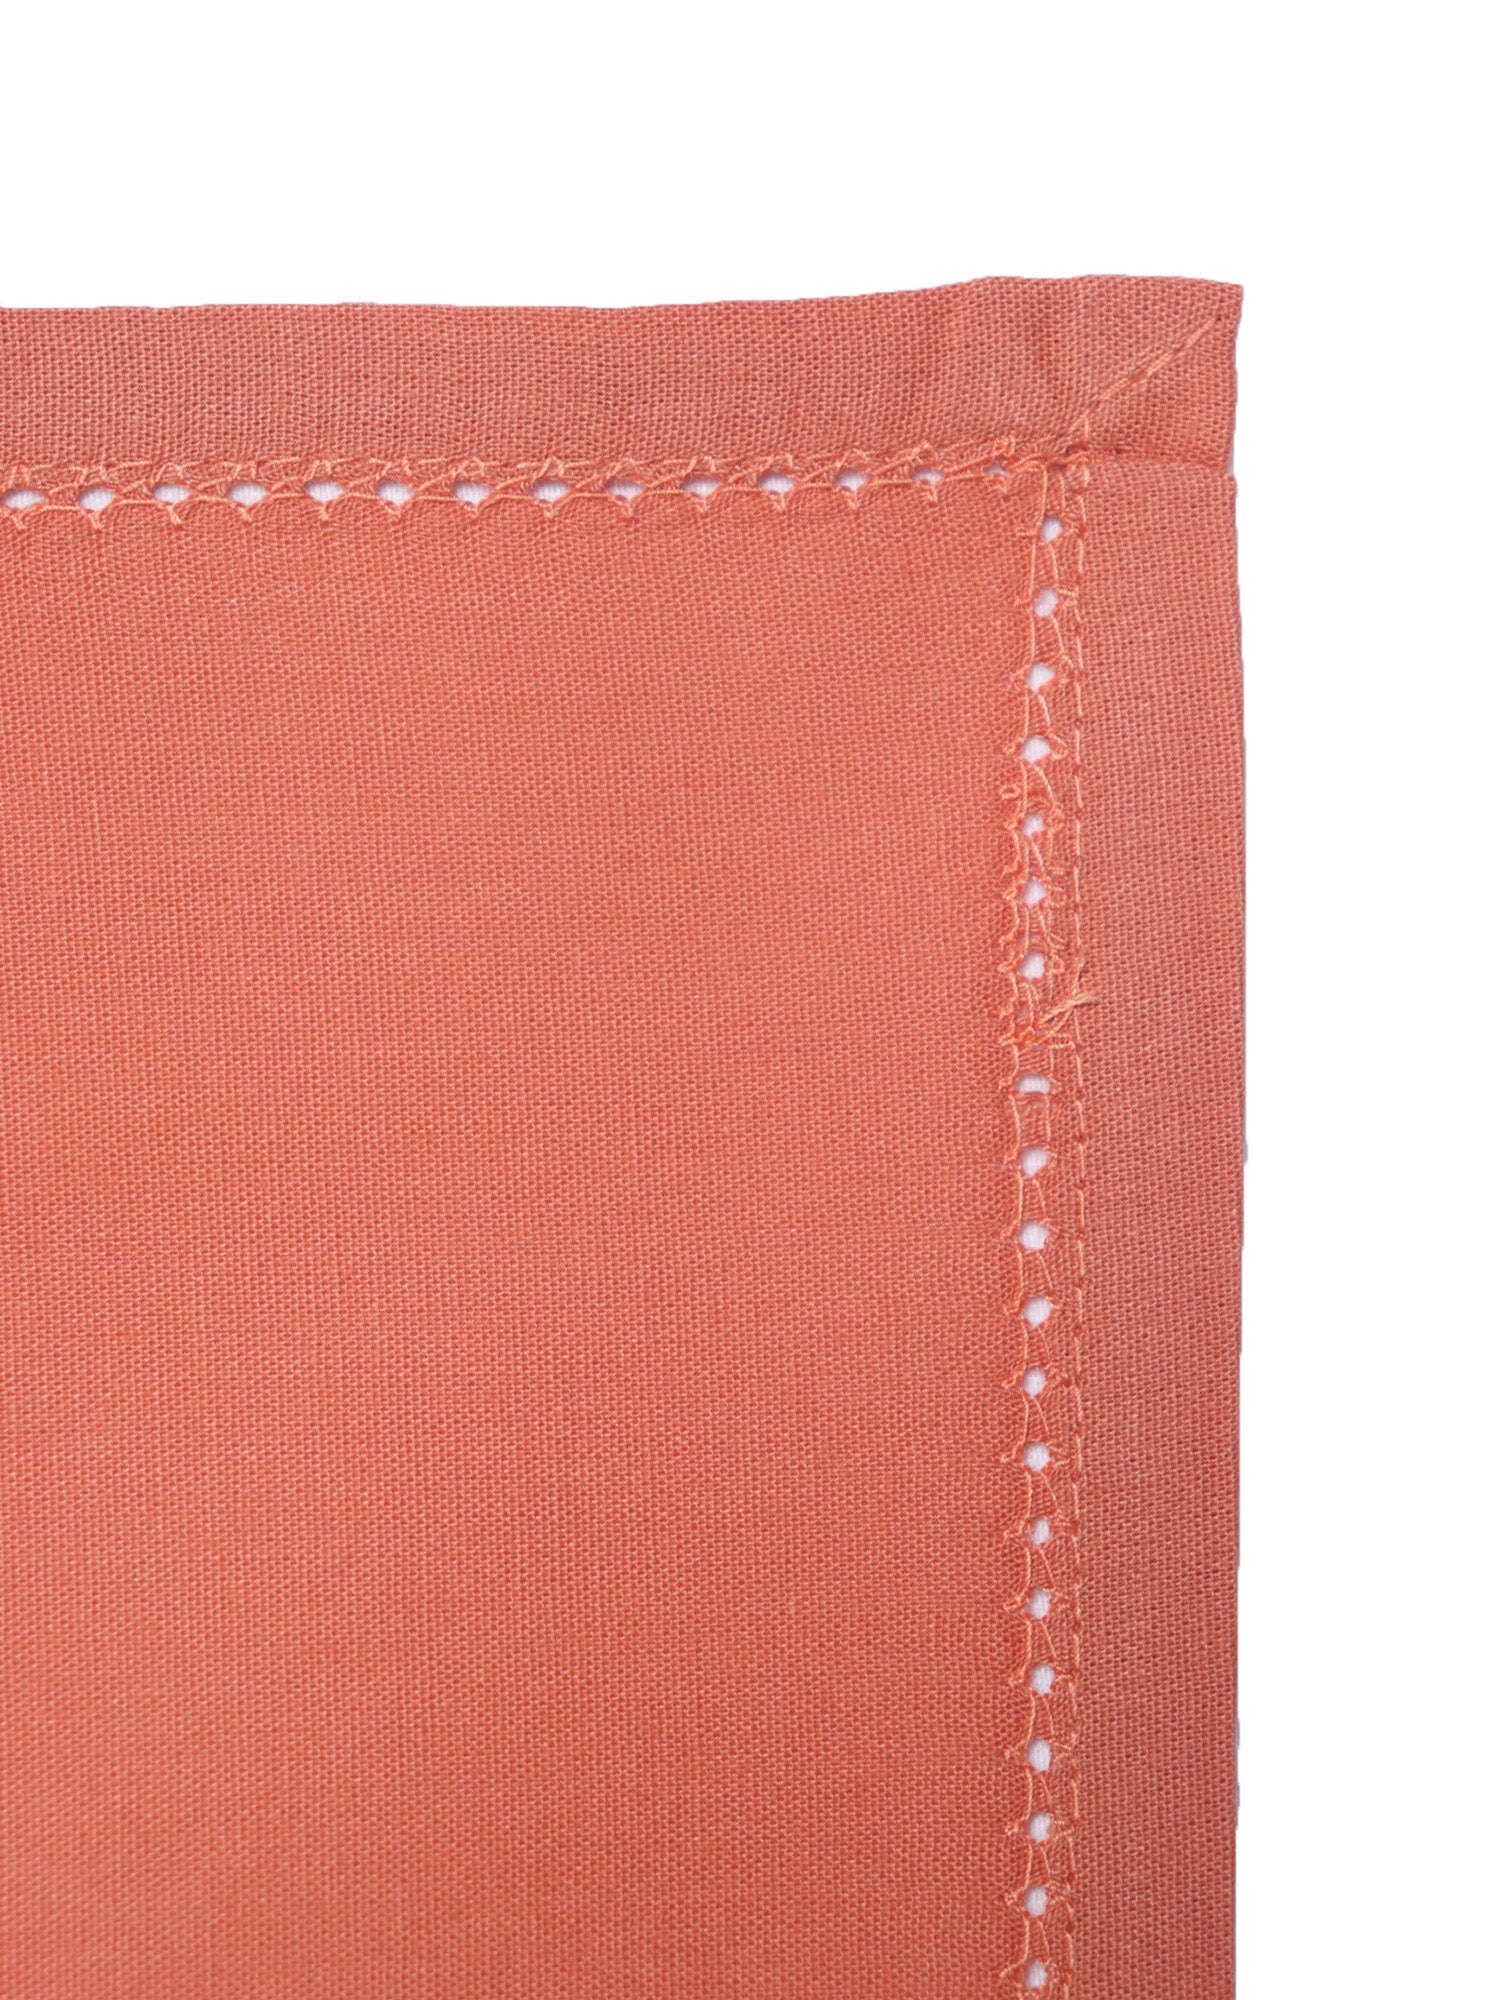 closeup of fagotting embroidered set of 6 dinner napkins in dark coral pink color - 16x16 inch